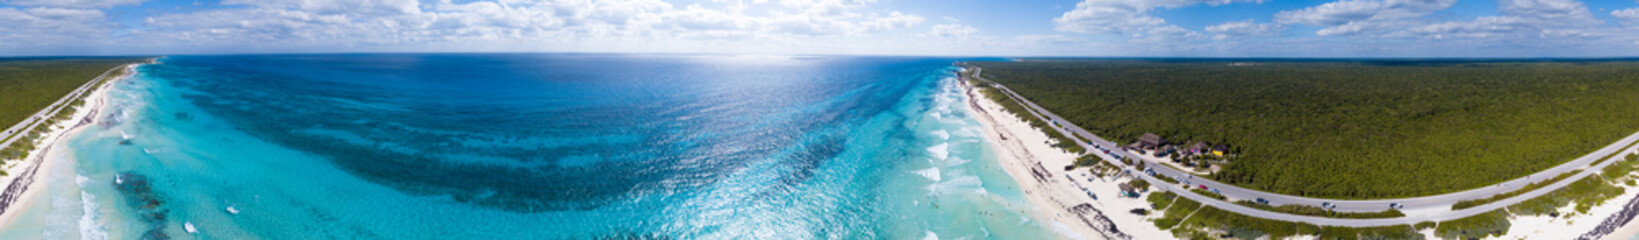 360 degree aerial panorama of beaches on the east side of Cozumel, Mexico